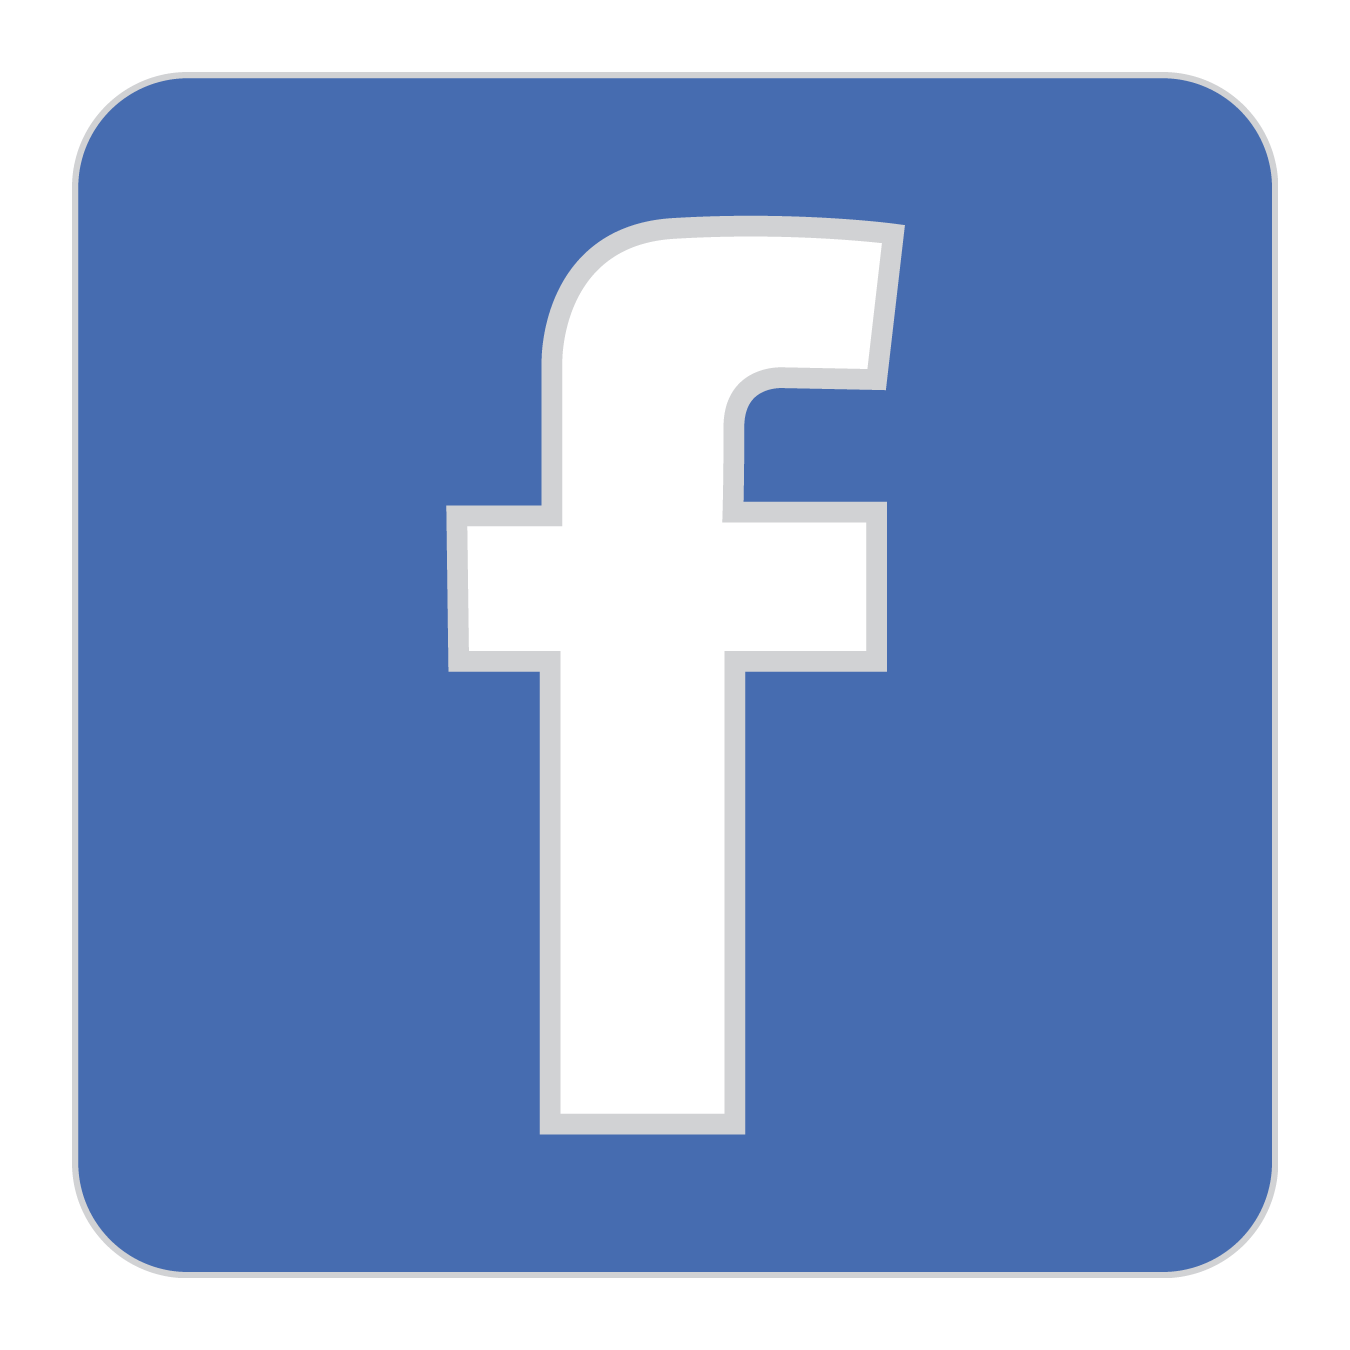 Facebook clipart app. Icon png images free